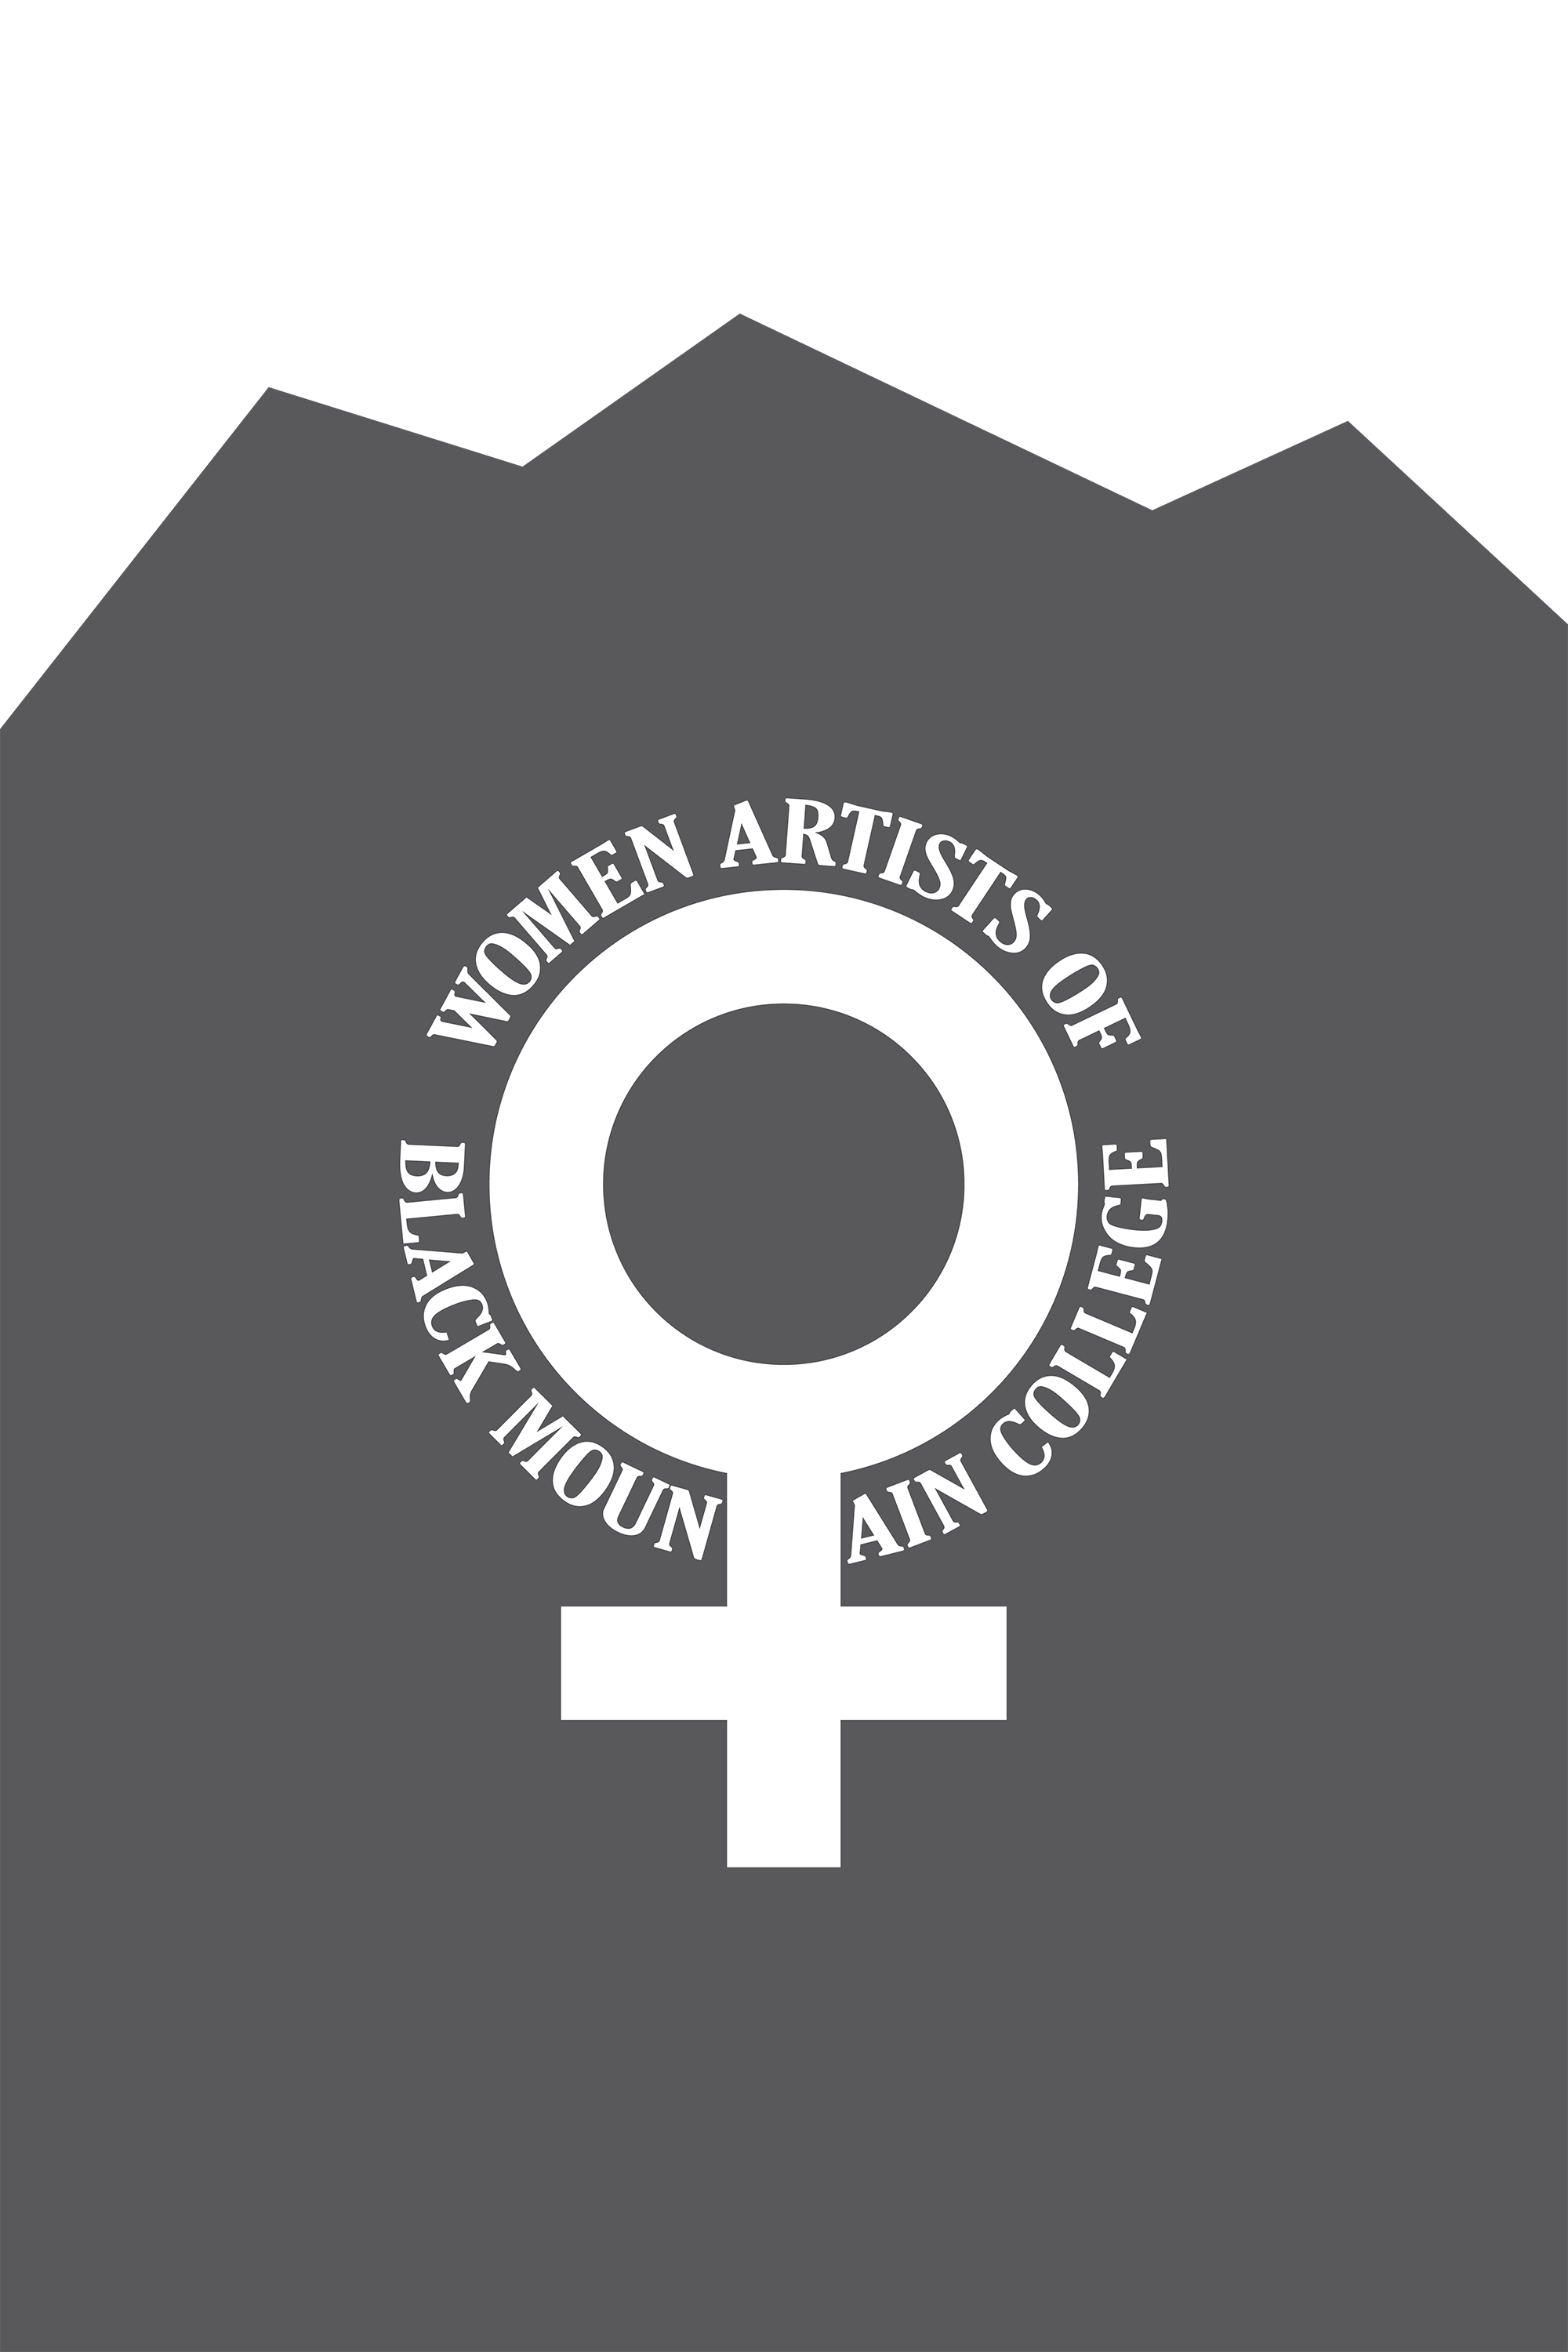 Black Mountain in Circle Logo - Women Artists of Black Mountain College | The Florence County Museum